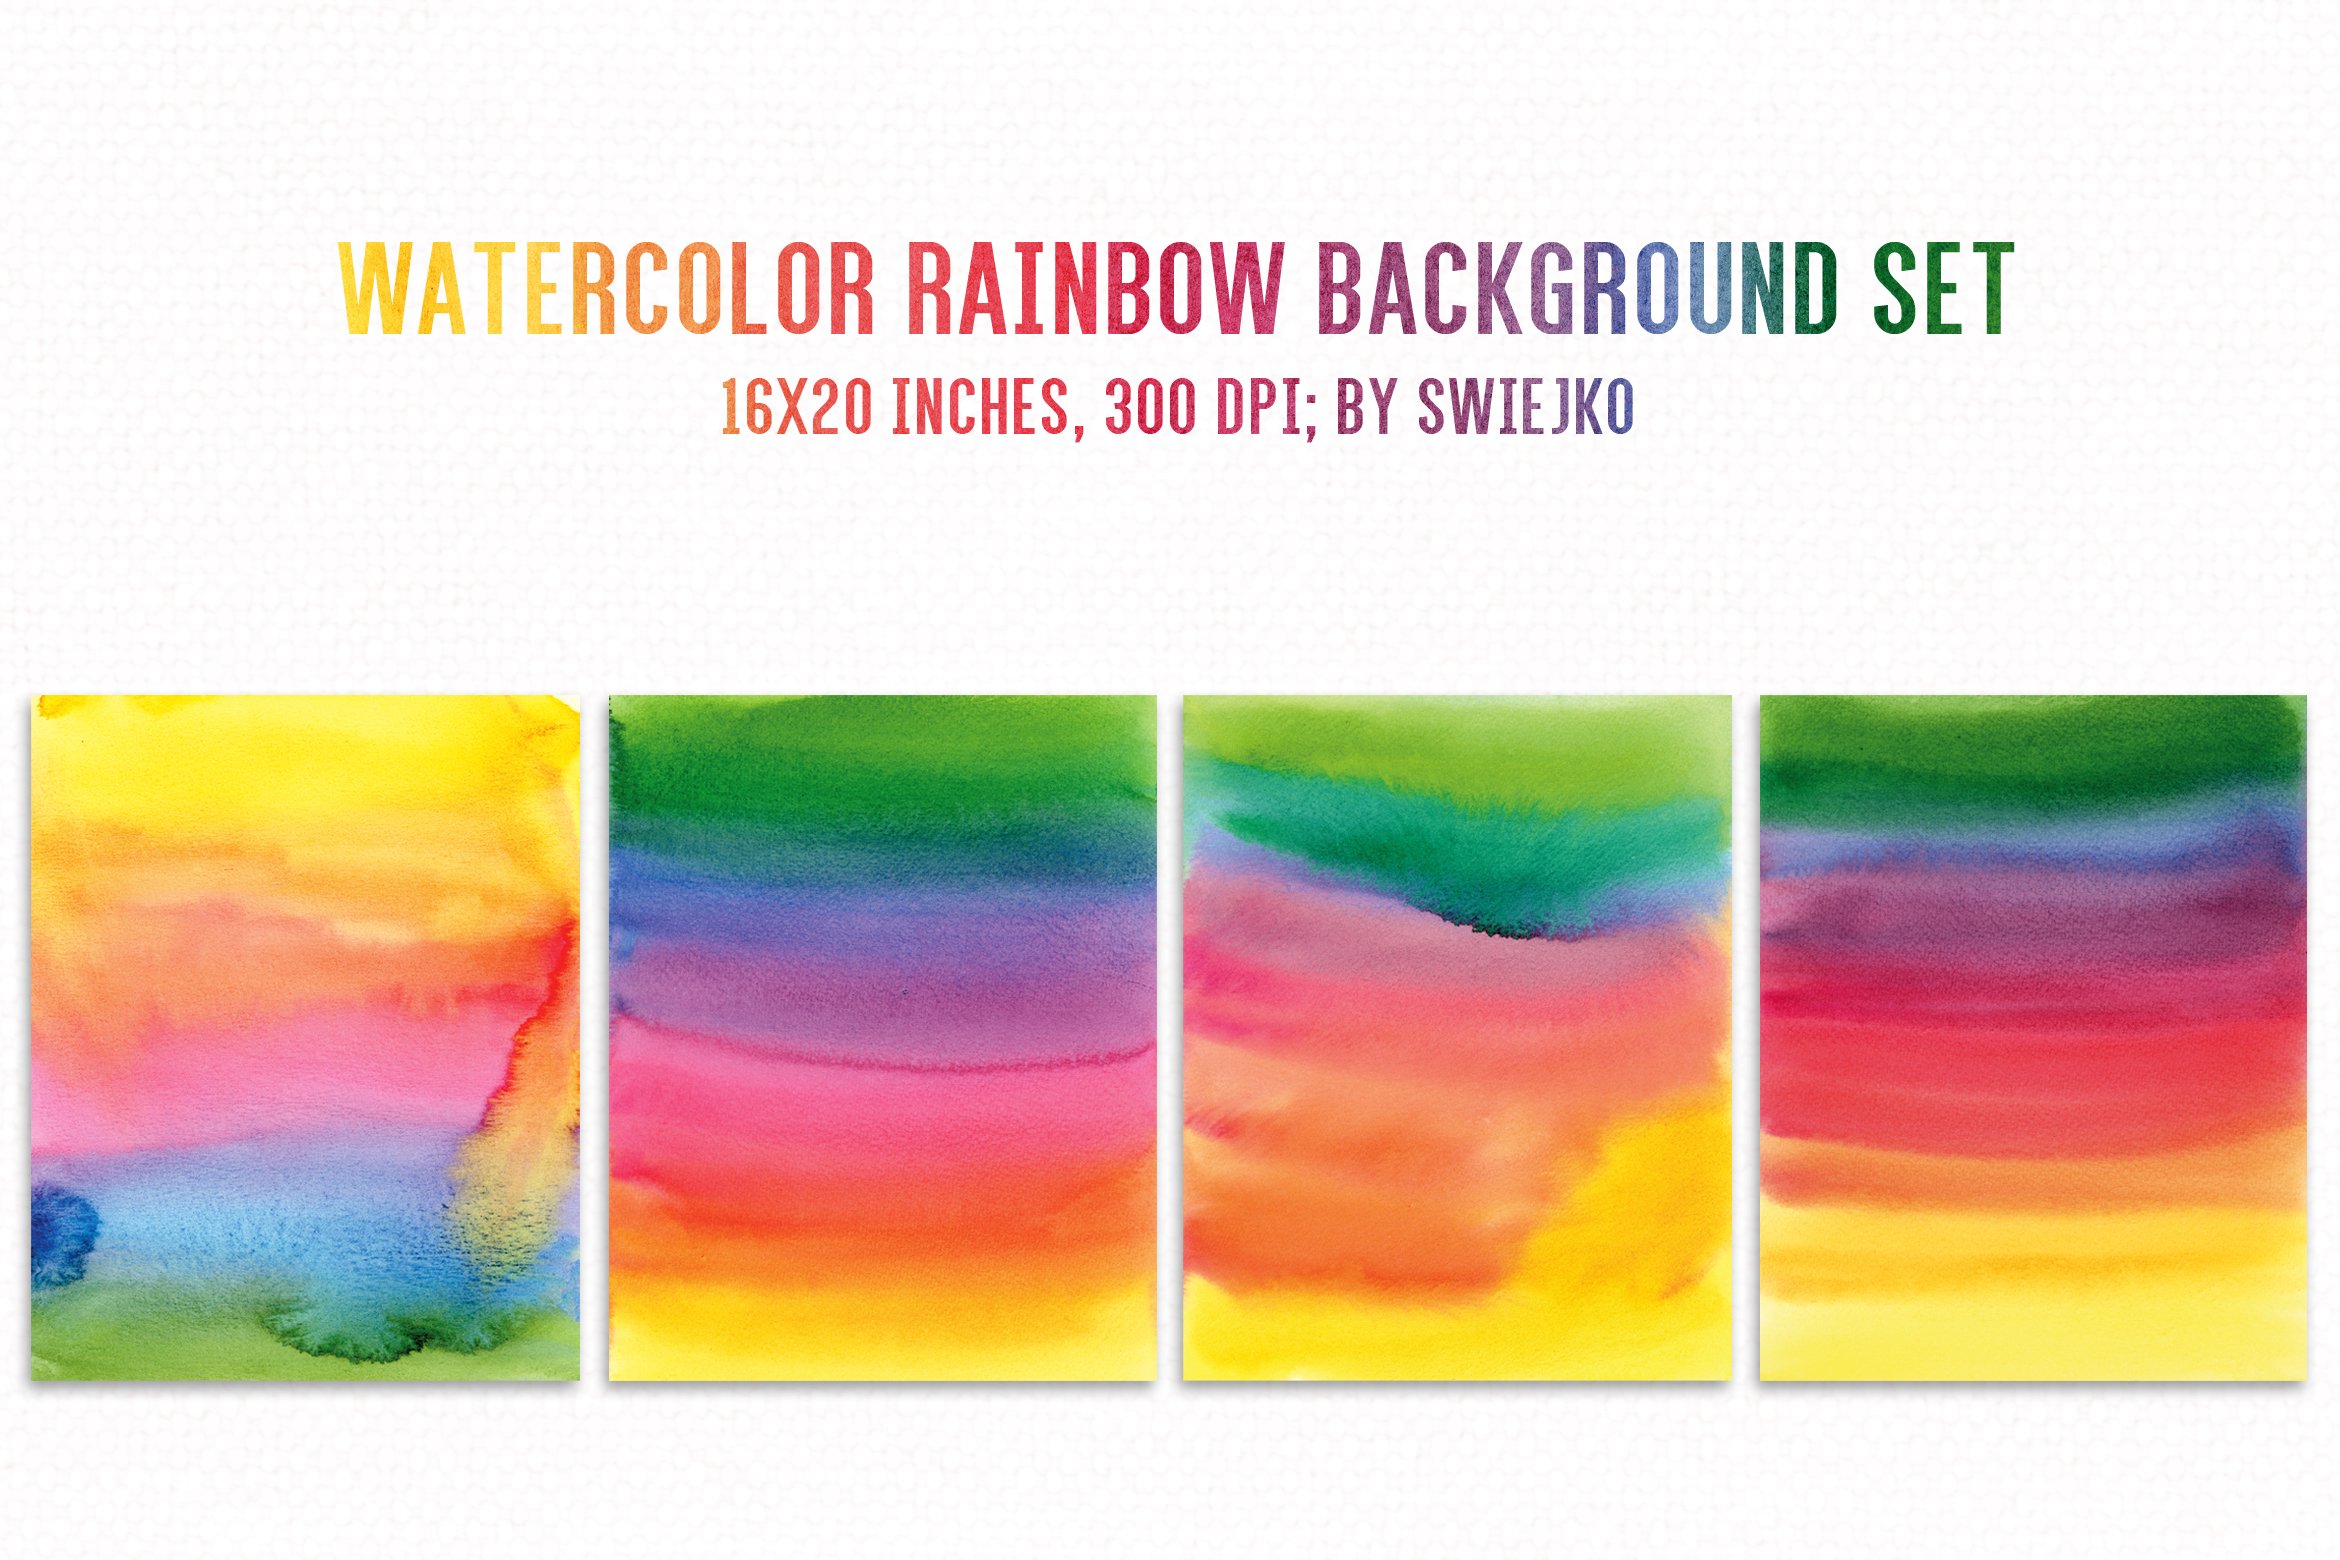 Watercolor Rainbow Background set x4 preview image.